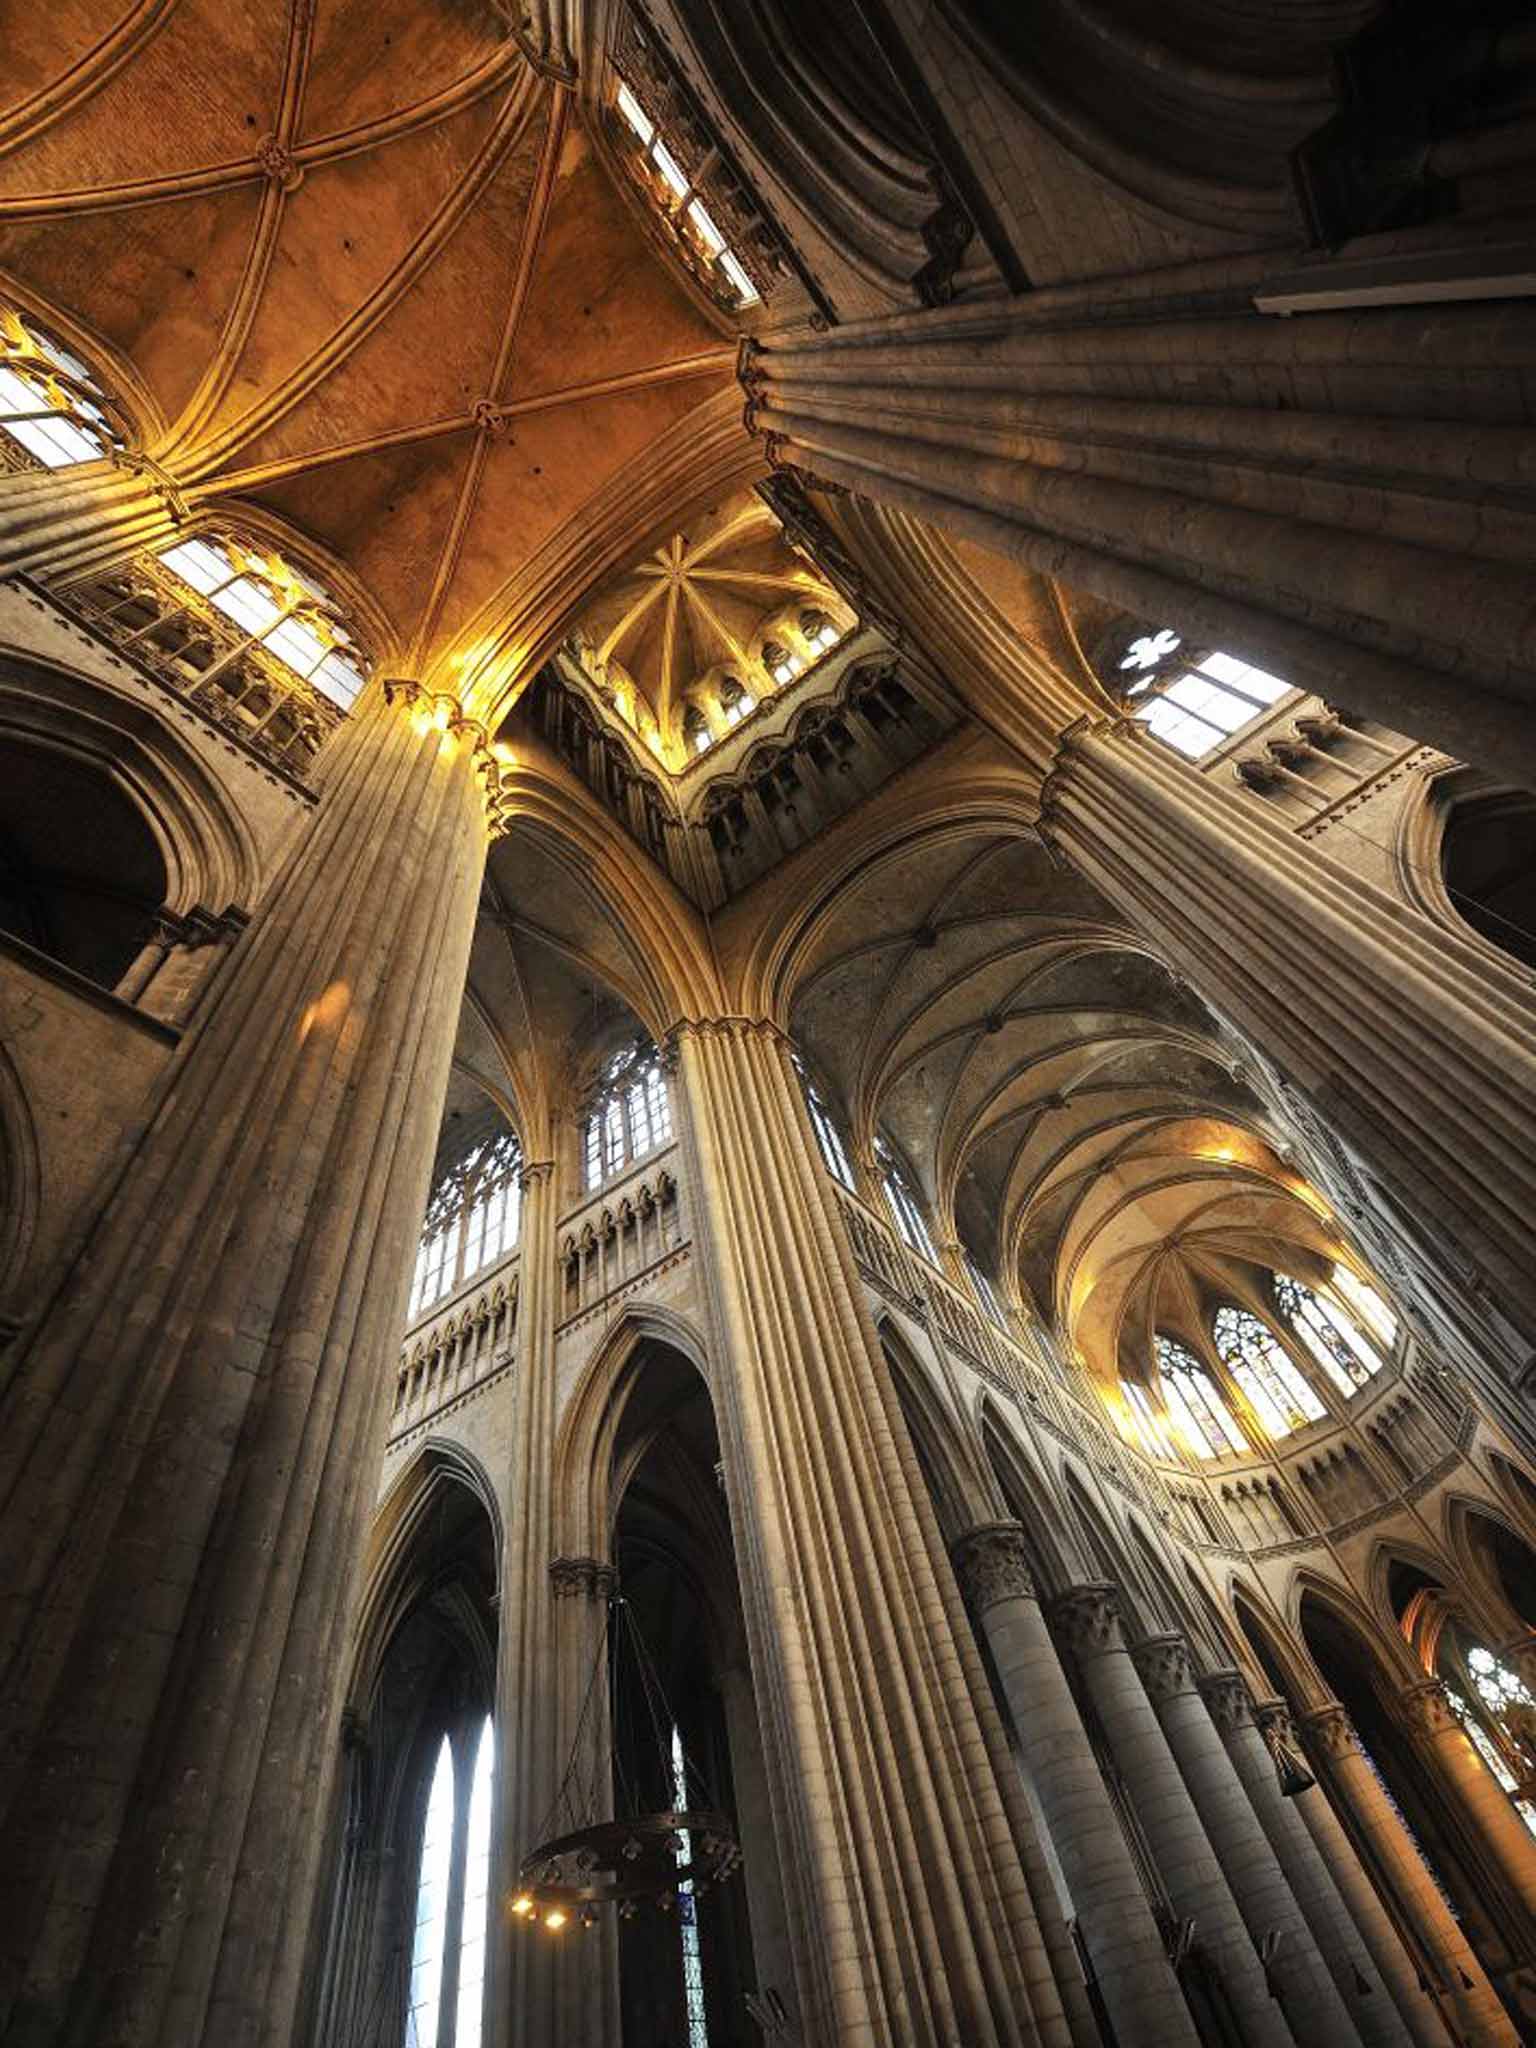 &#13;
Rouen cathedral&#13;